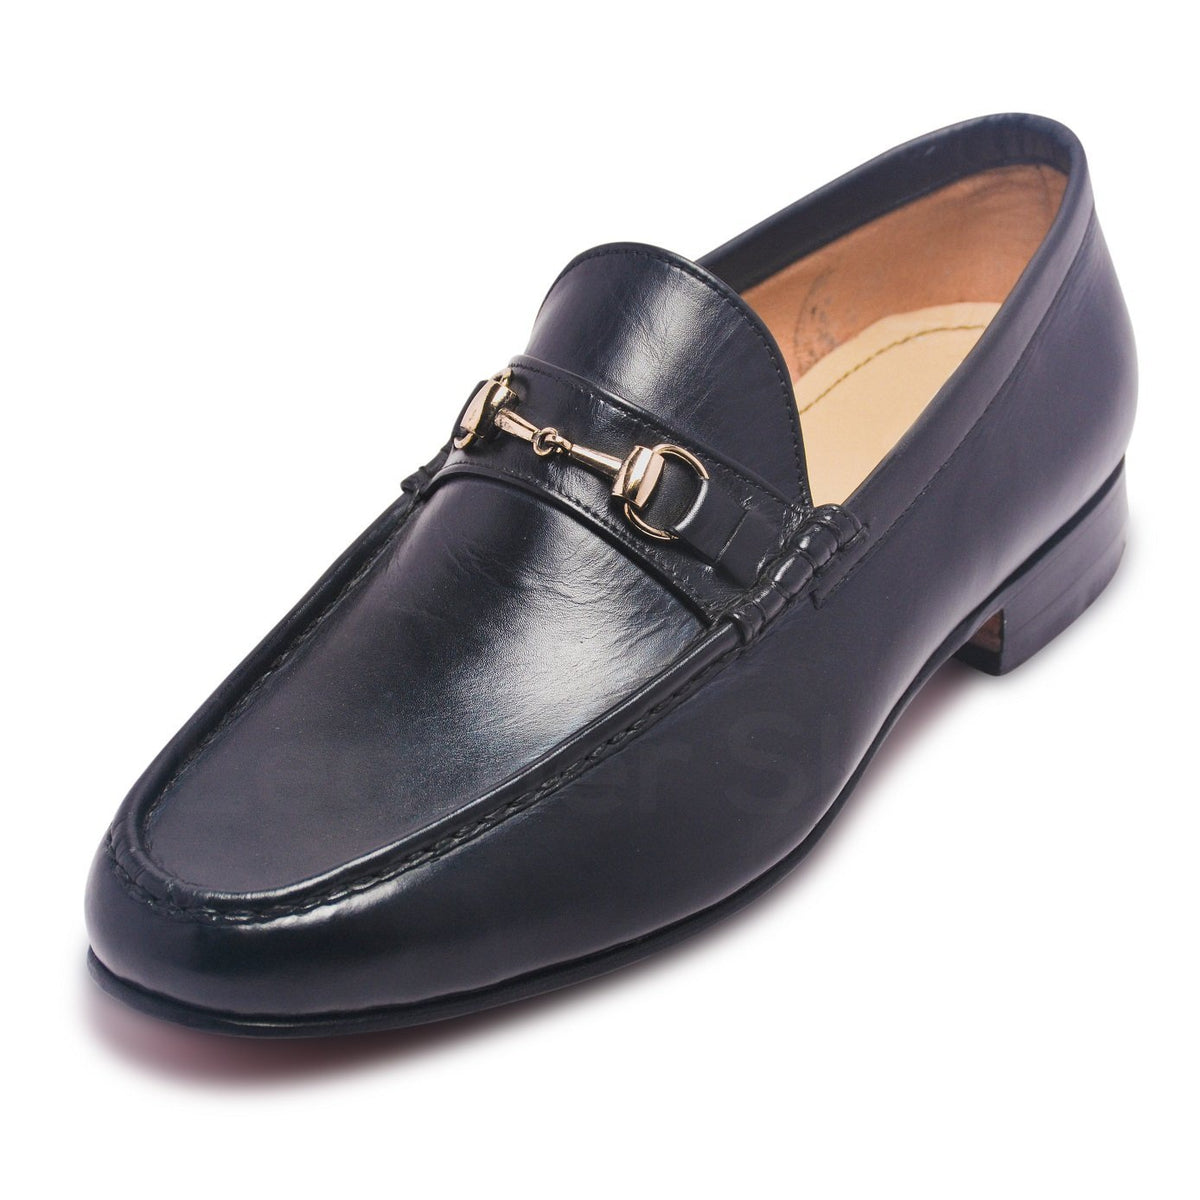 Black Loafers For Men In Genuine Leather